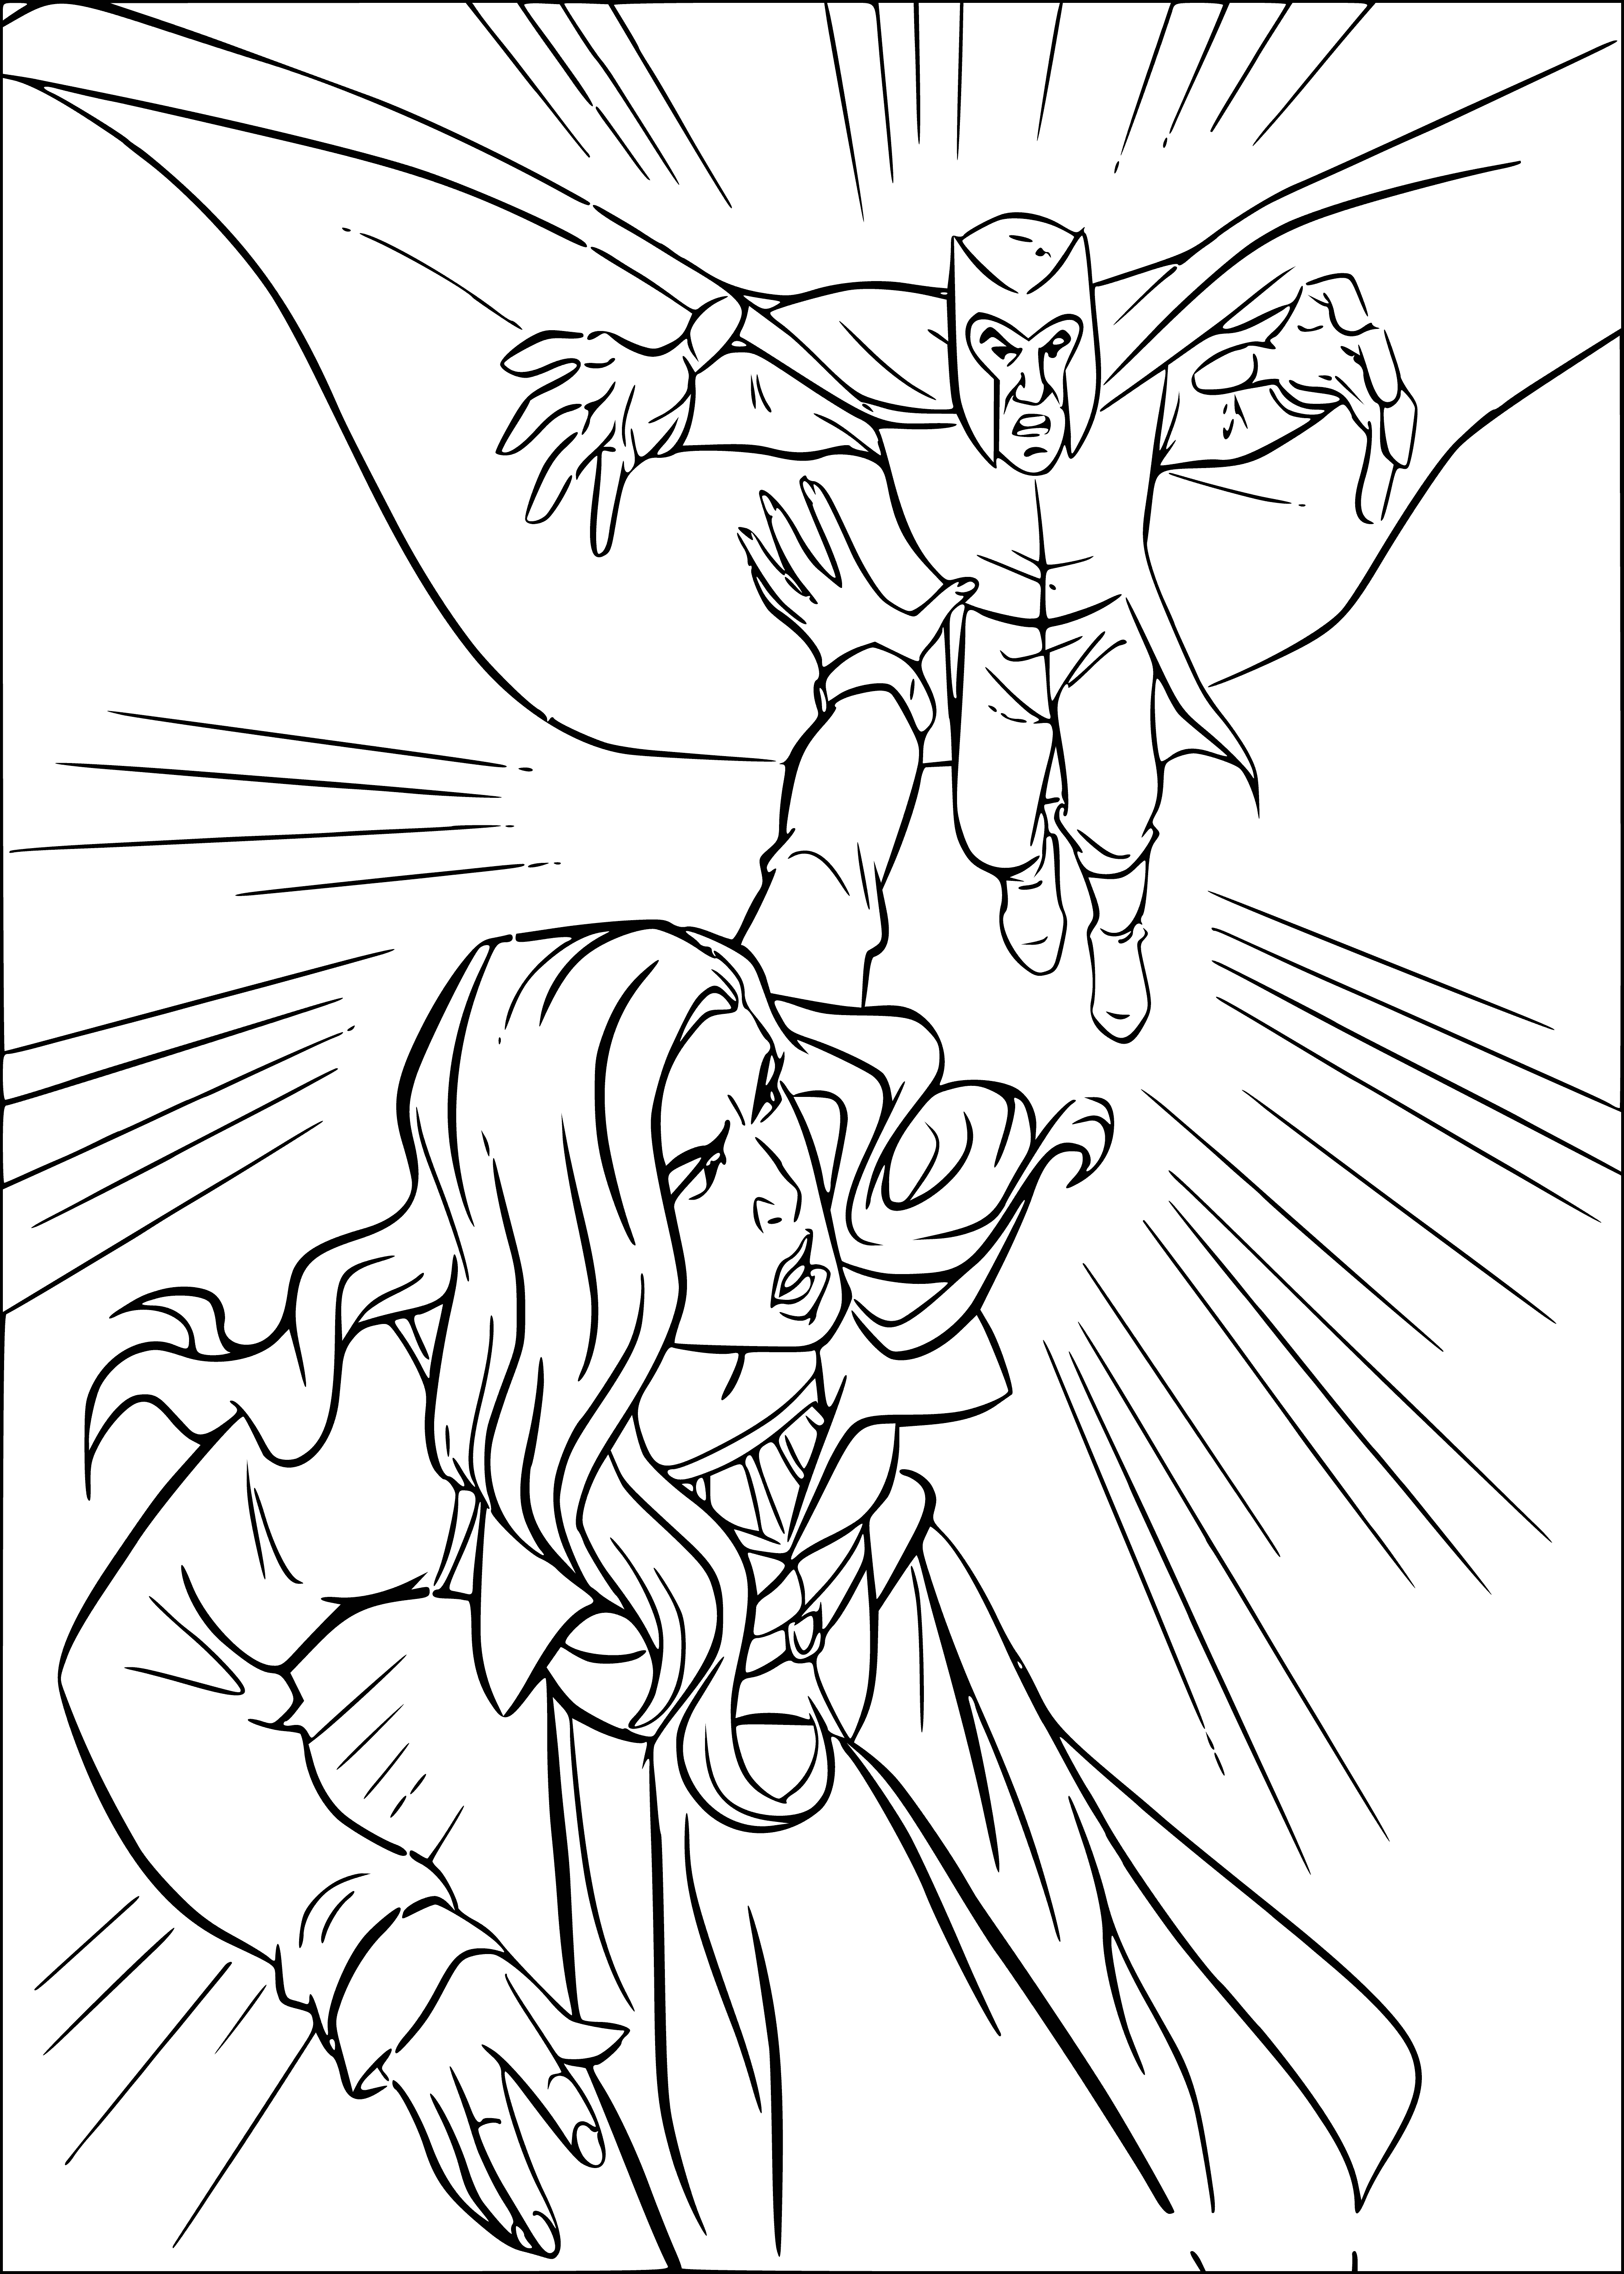 coloring page: Two people, floating w/ hands held, he donning a purple cape, she sporting a green dress, unite in air despite diffs. #love